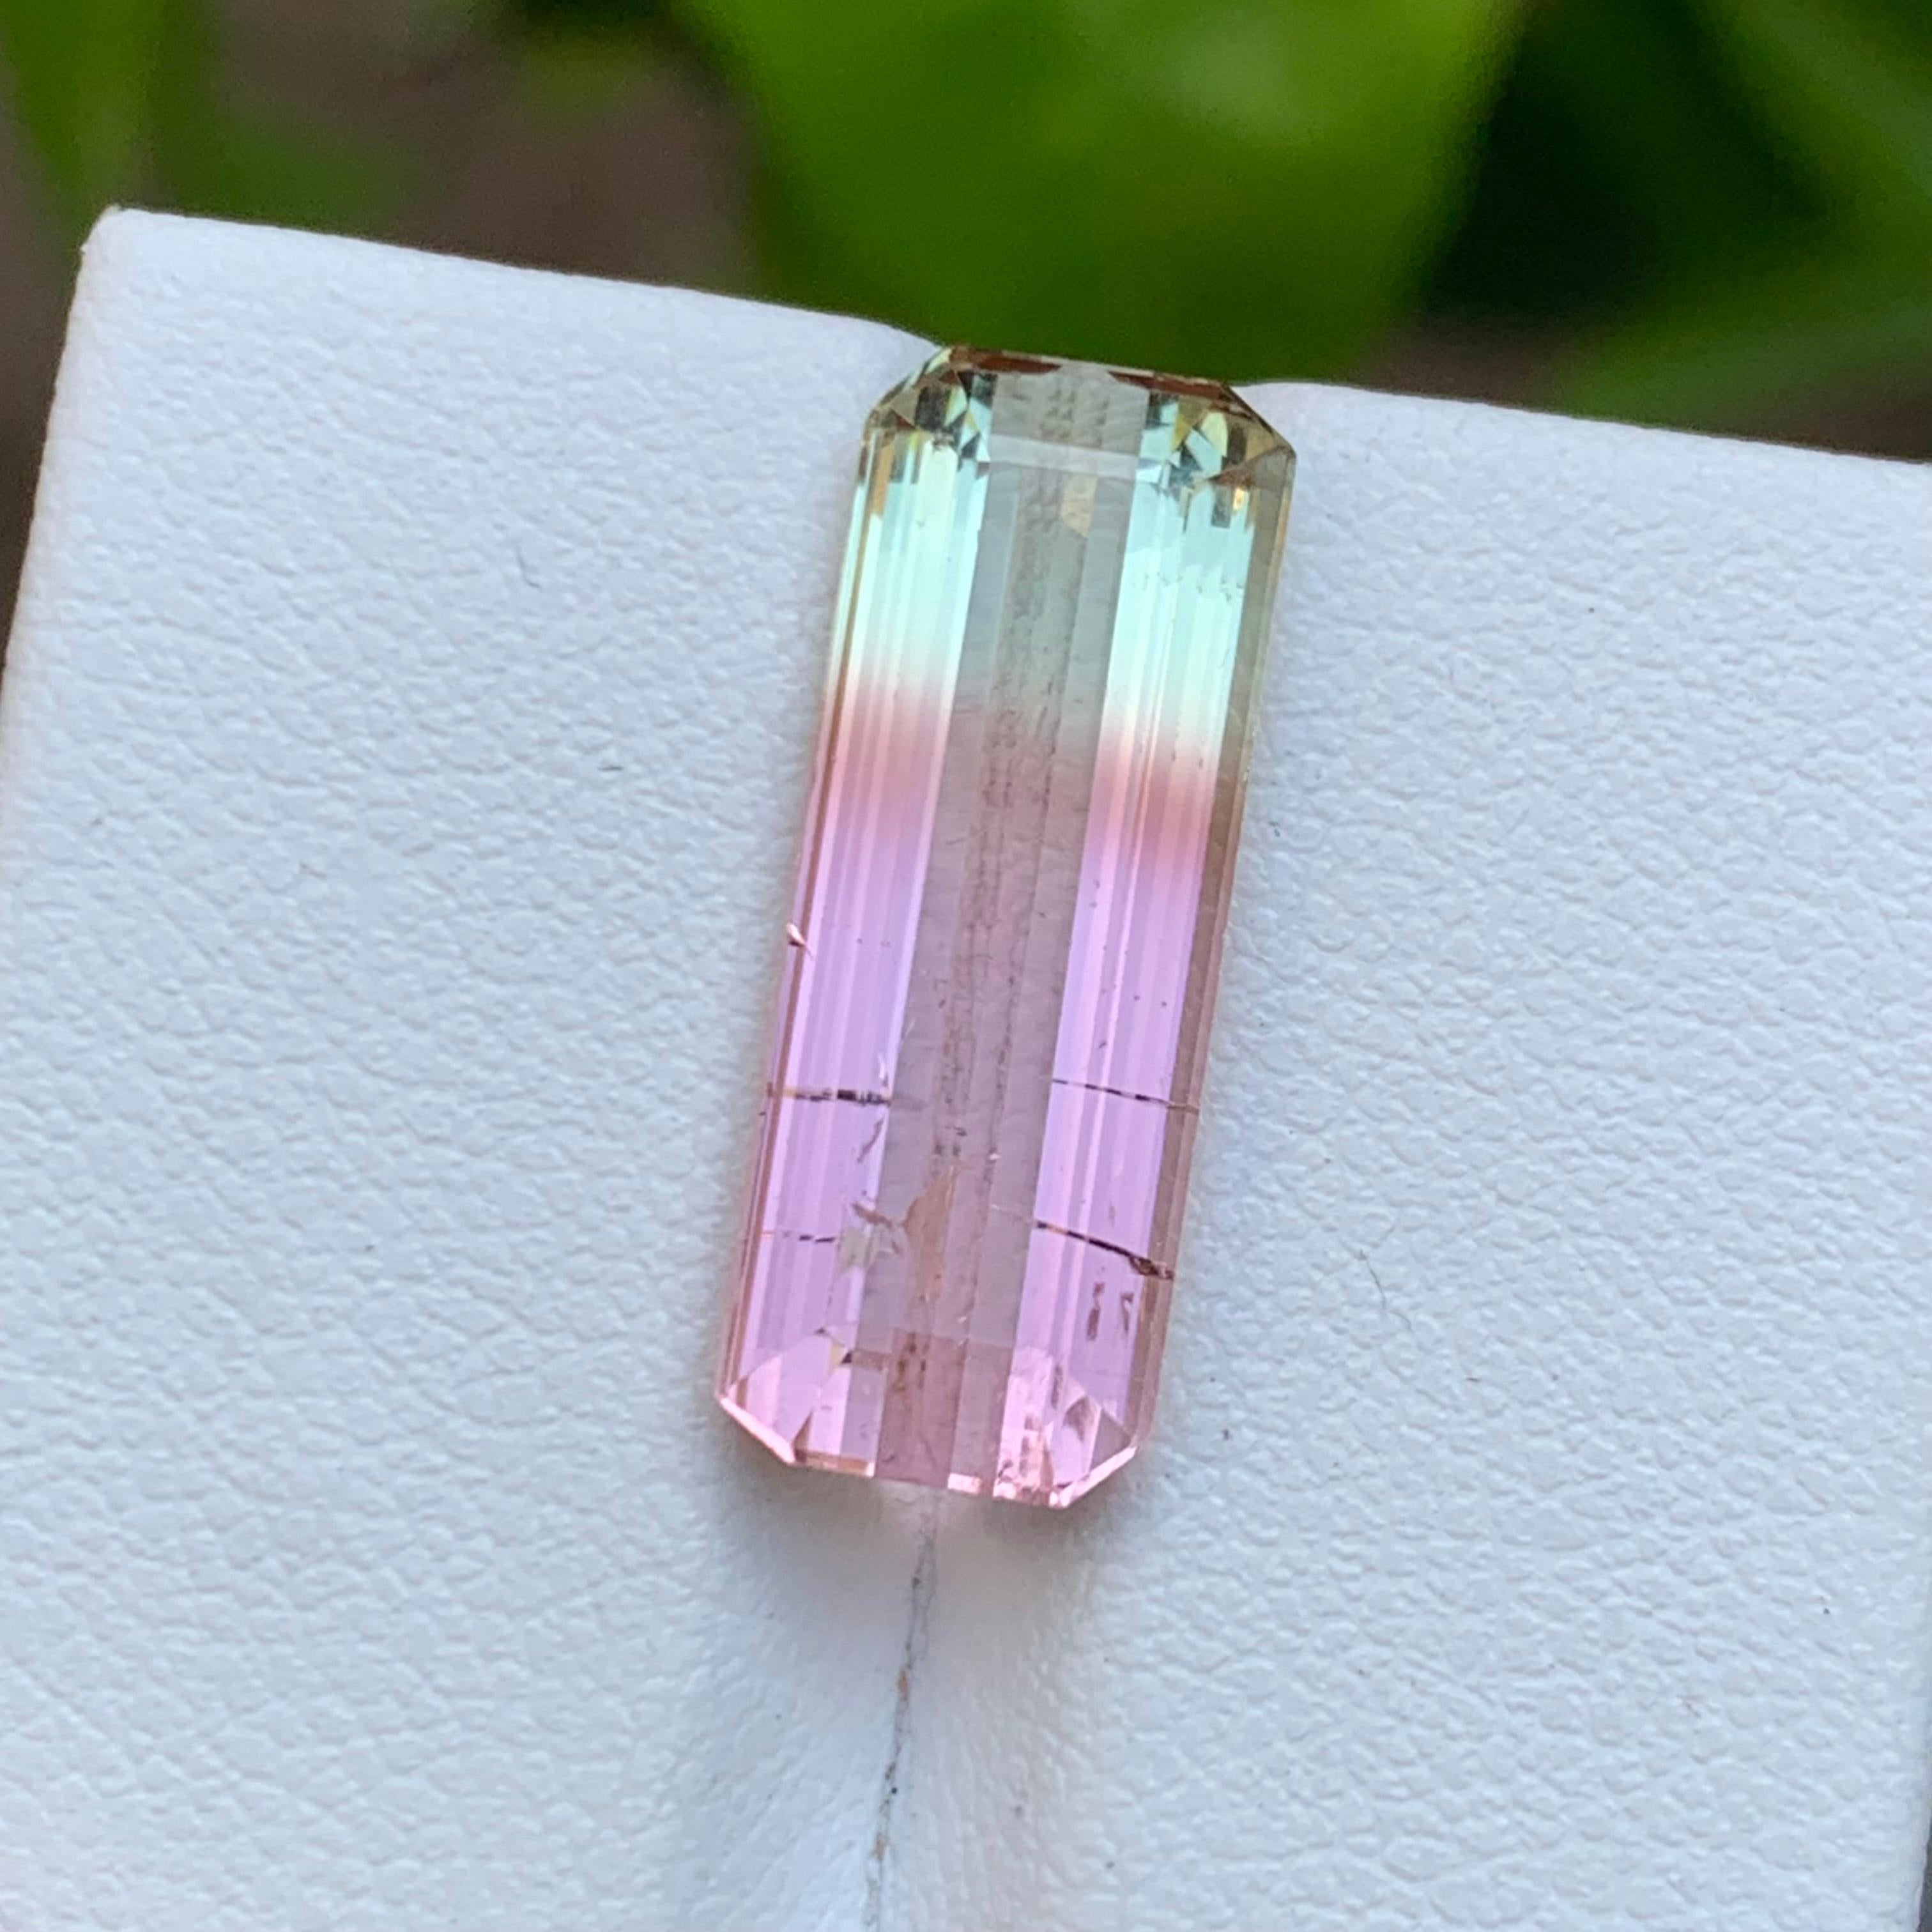 GEMSTONE TYPE: Tourmaline
PIECE(S): 1
WEIGHT: 8.35 Carats
SHAPE: Emerald
SIZE (MM): 19.77 x 7.56 x 5.60
COLOR: Bicolor Pink & Pale Green
CLARITY: Slightly Included with minor crack
TREATMENT: Heated
ORIGIN: Afghanistan
CERTIFICATE: On demand

A very